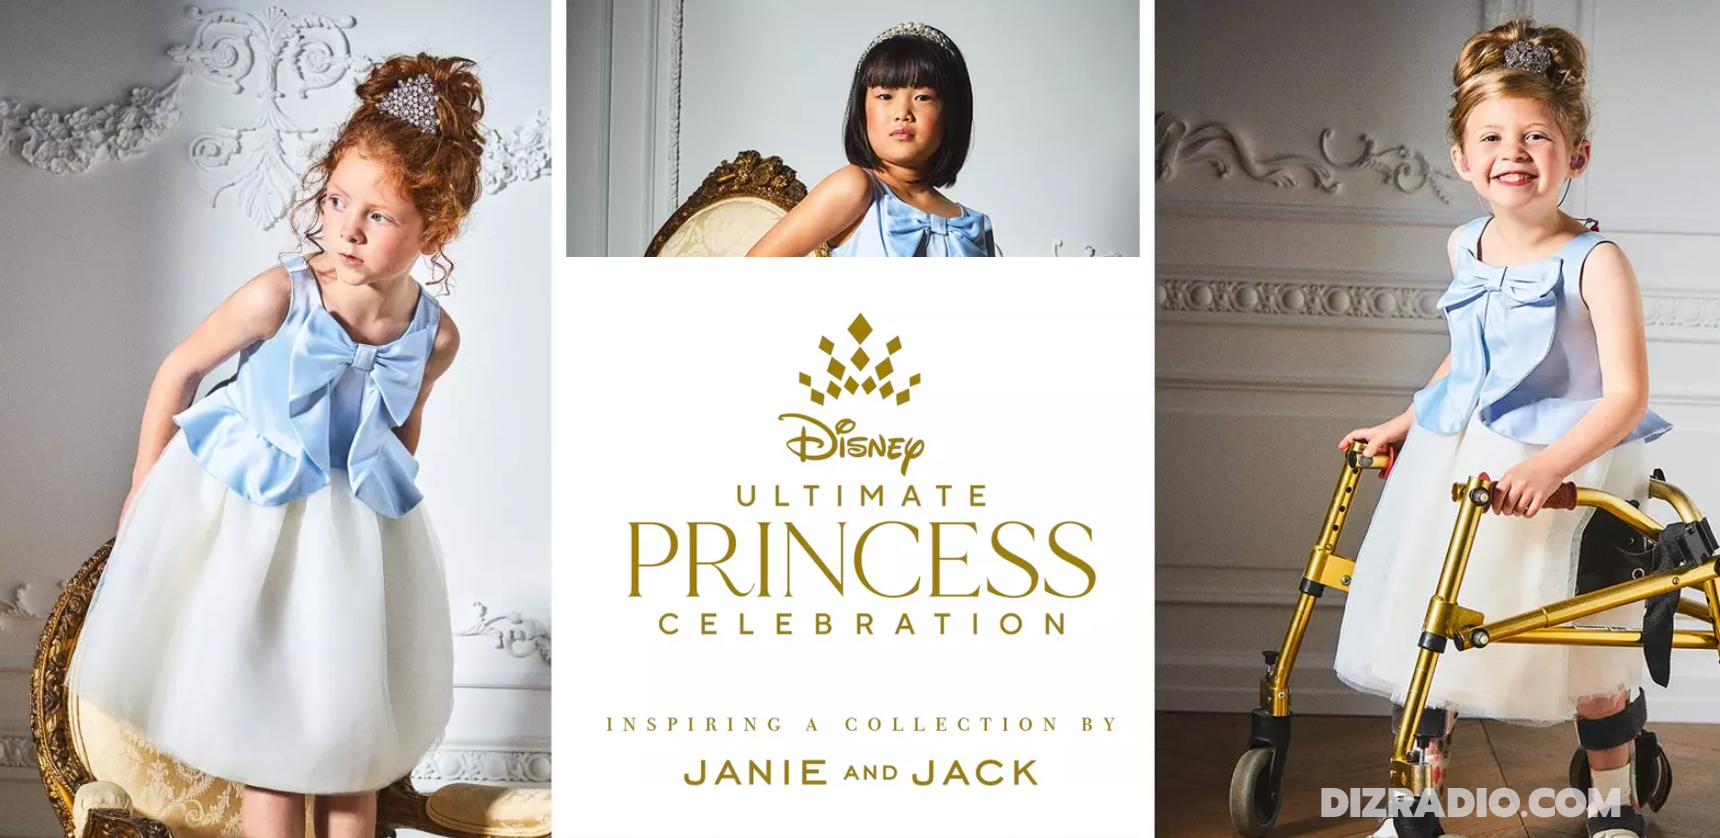 Janie And Jack Debuts "Everyone's A Princess" Campaign To Celebrate The Launch Of Disney Princess-Inspired Collection